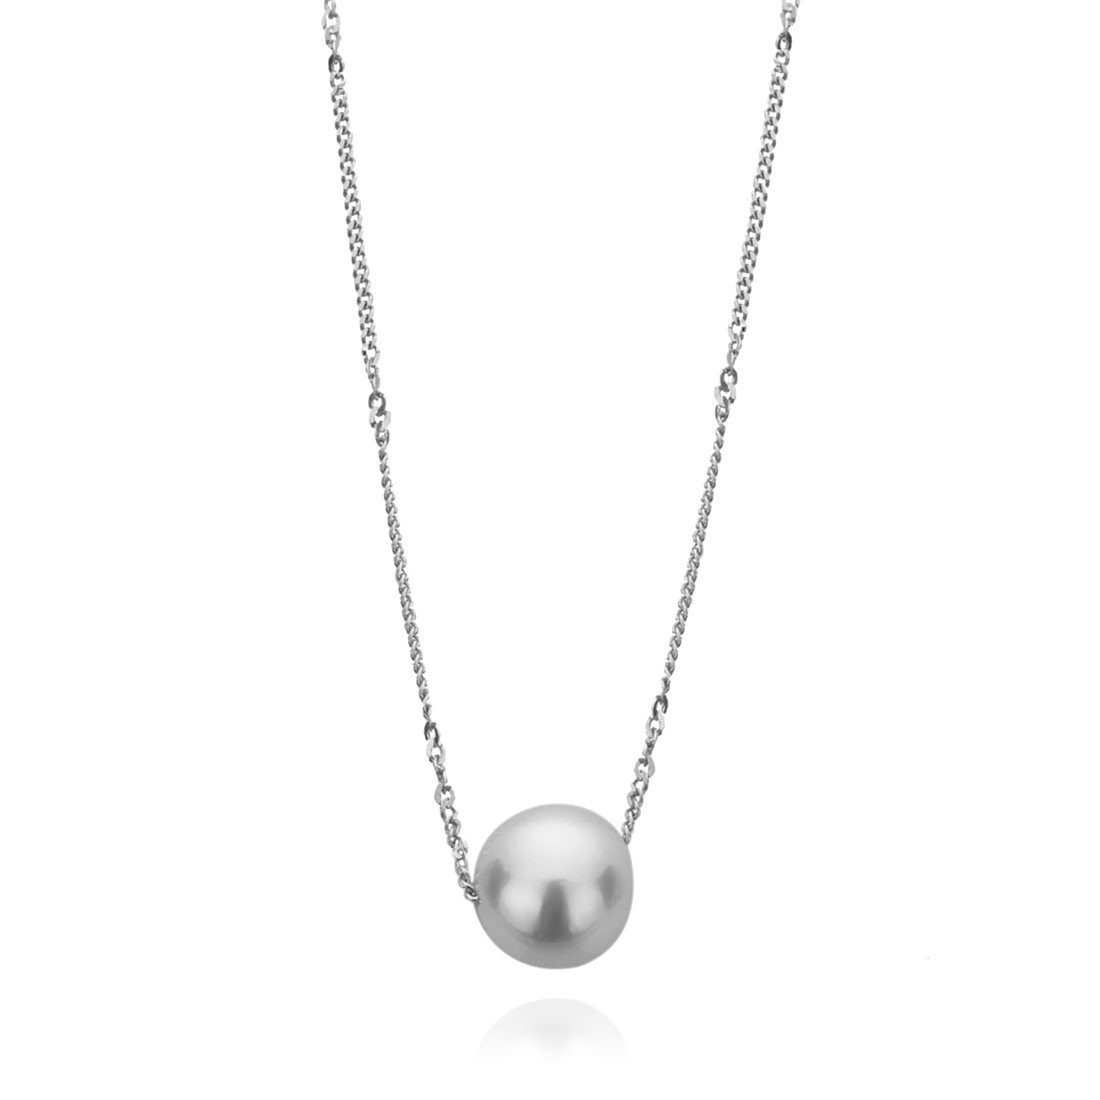 14K White Gold Chain White South Sea Cultured Pearl Pendant Necklace, 9.0-9.5mm